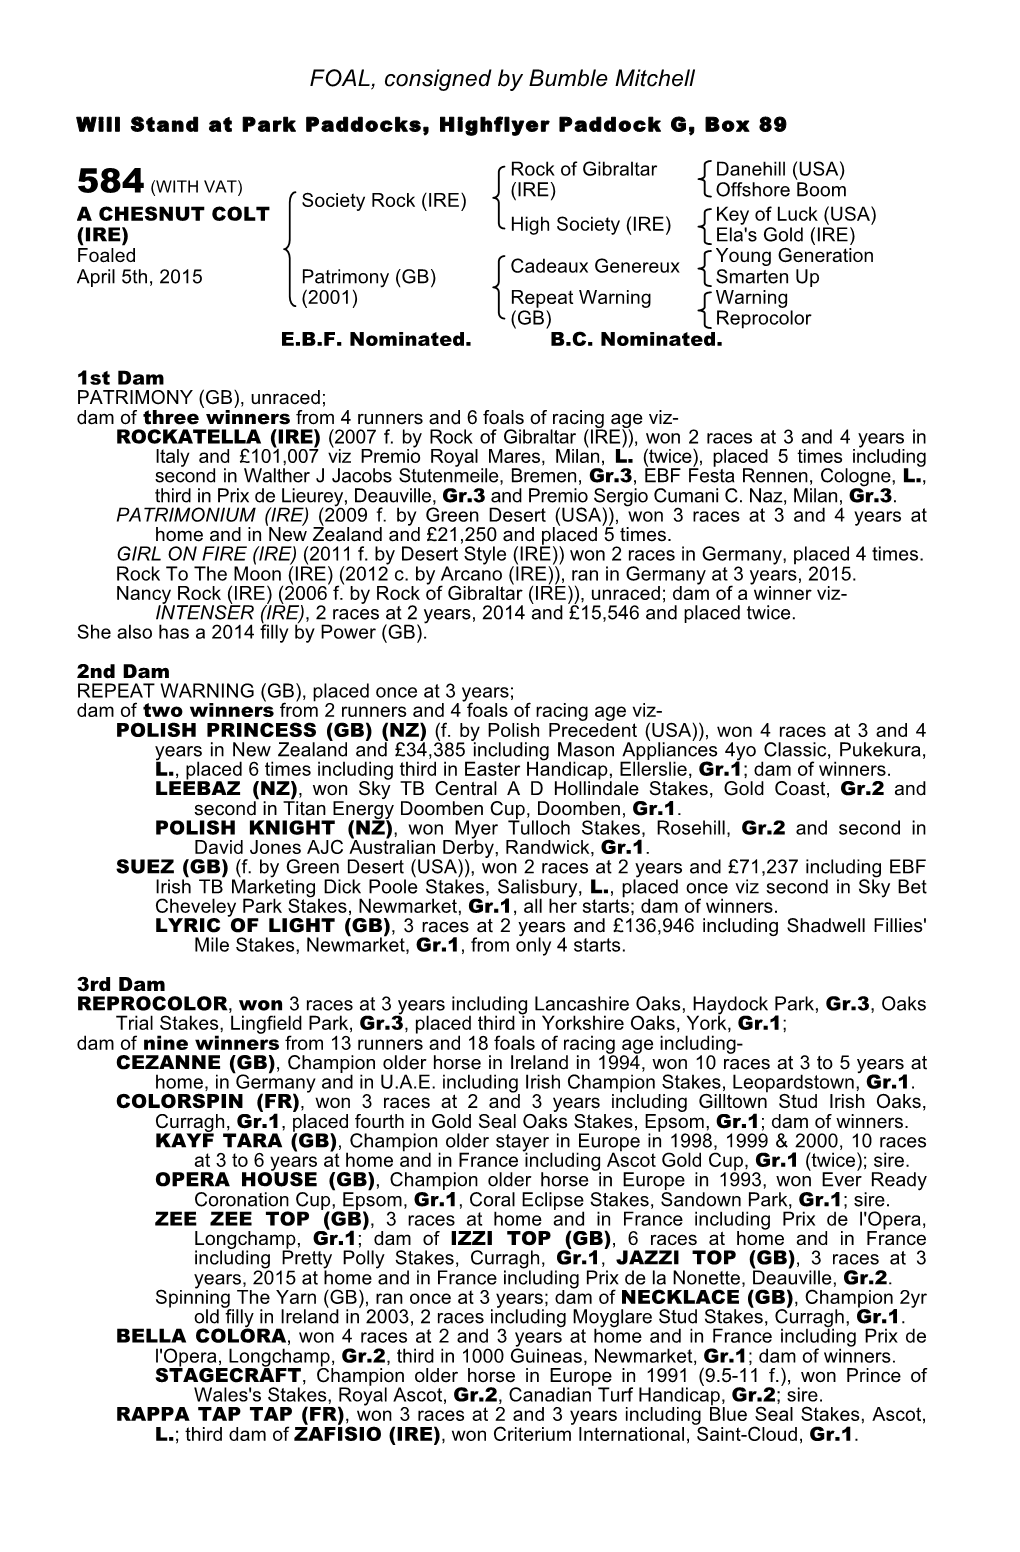 FOAL, Consigned by Bumble Mitchell